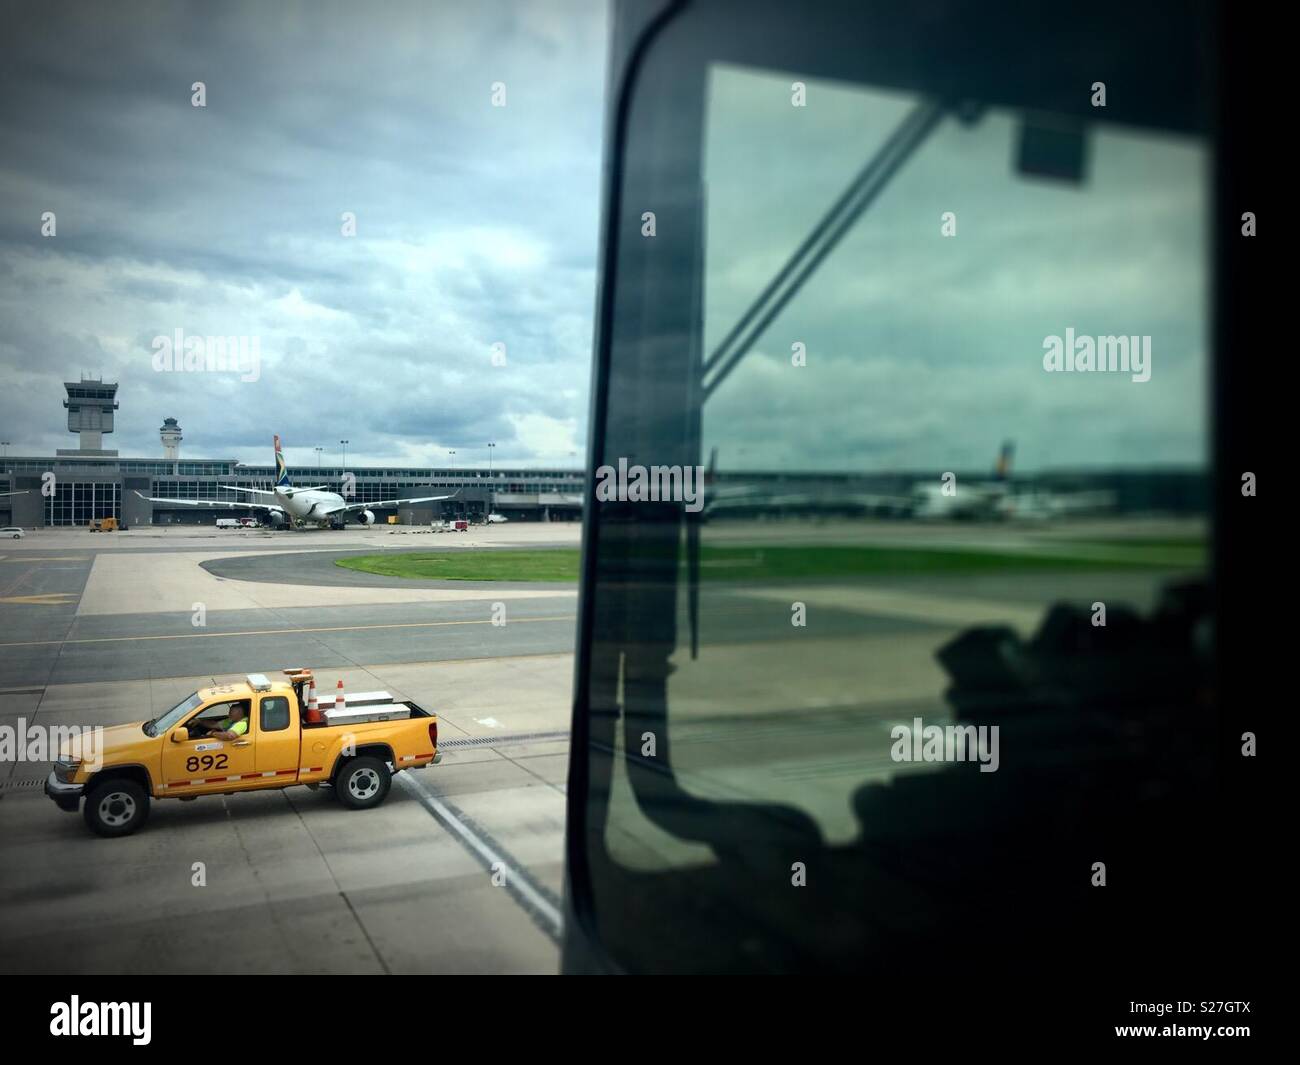 Sterling, Virginia, USA - June 27, 2018: A ground vehicle passes by a mobile passenger lounge taking airline passengers to a midfield terminal at Washington Dulles International Airport. Stock Photo